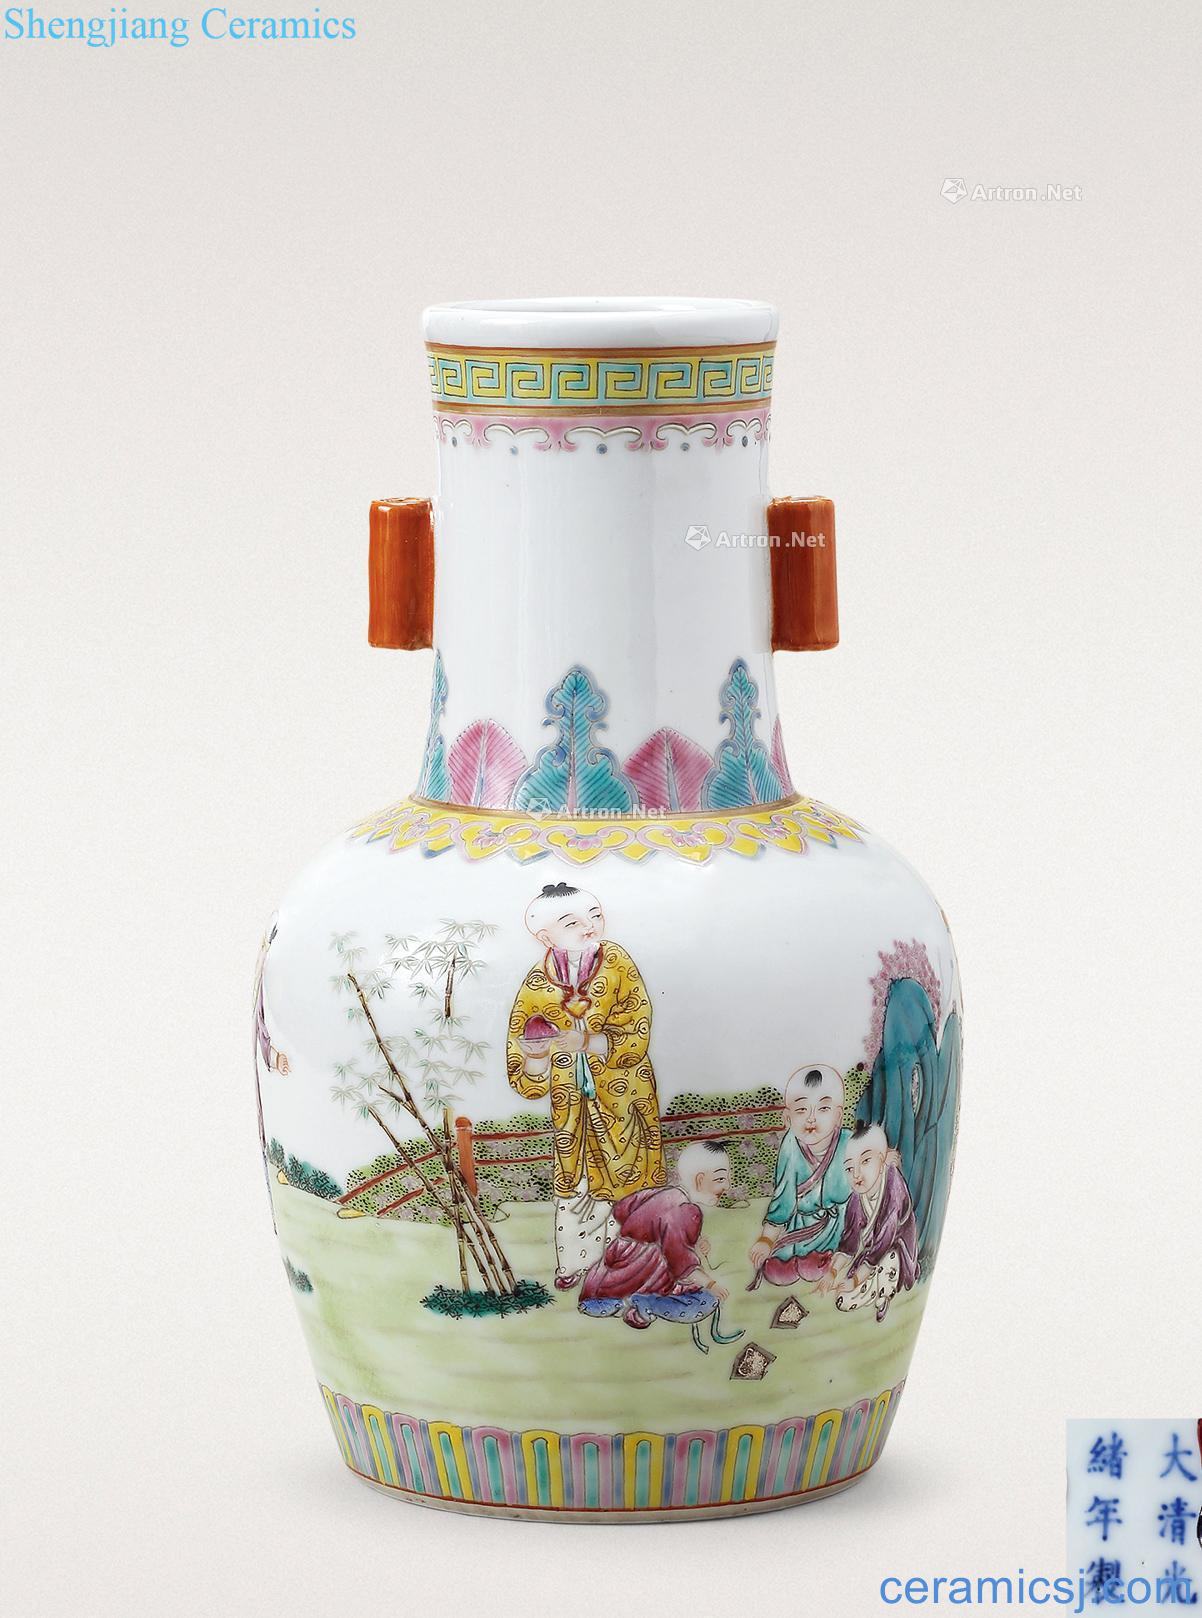 Qing dynasty vase with a consistent pastel baby play